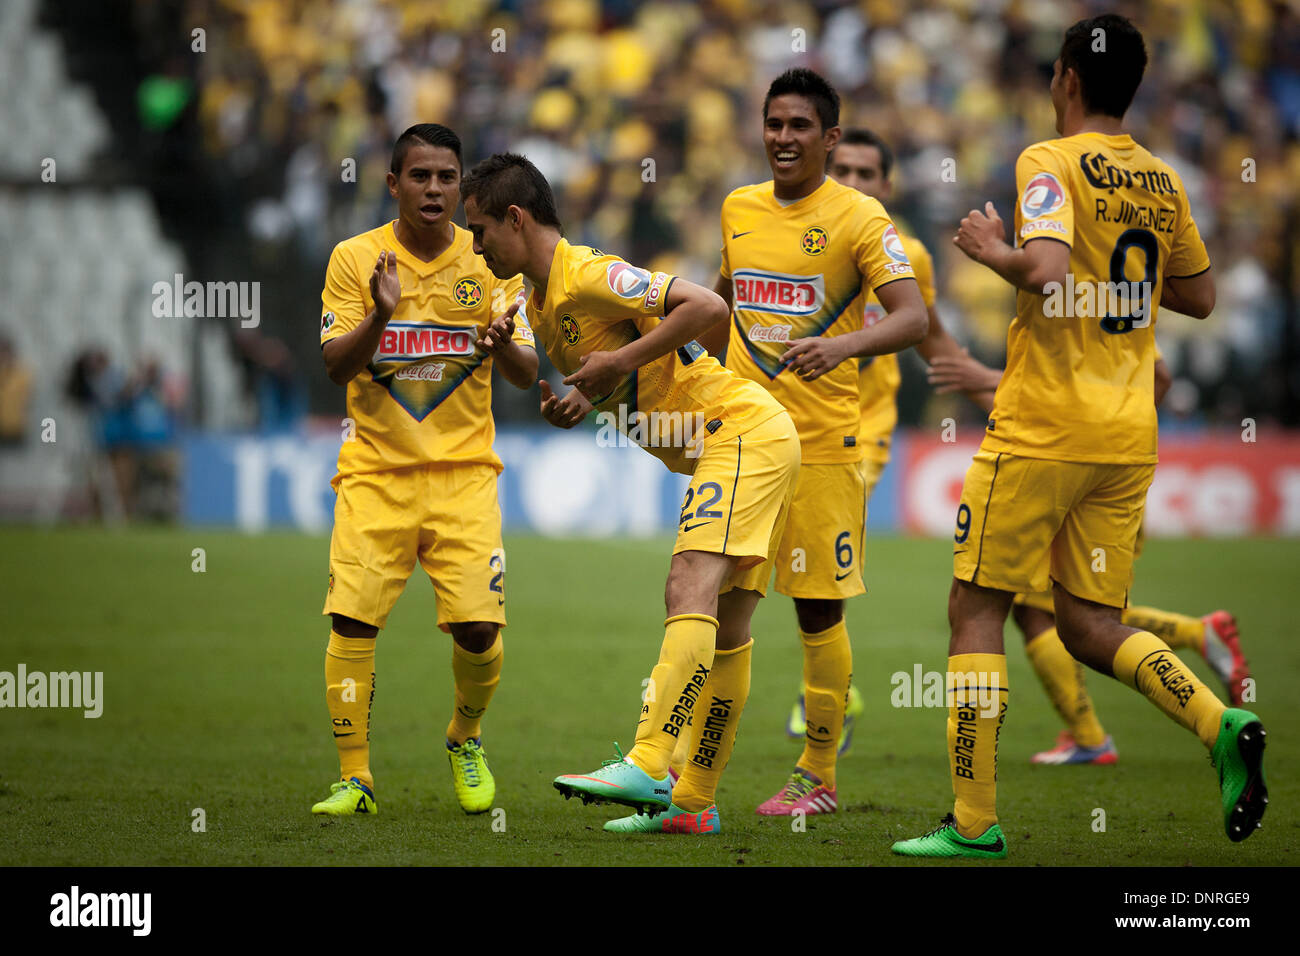 Mexico City, Mexico. 4th Jan, 2014. Paul Aguilar (2nd L) of America celebrates for a goal during the match against Tigres at the MX League Closing Tournament 2014, held in the Azteca Stadium, in Mexico City, capital of Mexico, on Jan. 4, 2014. Credit:  Pedro Mera/Xinhua/Alamy Live News Stock Photo